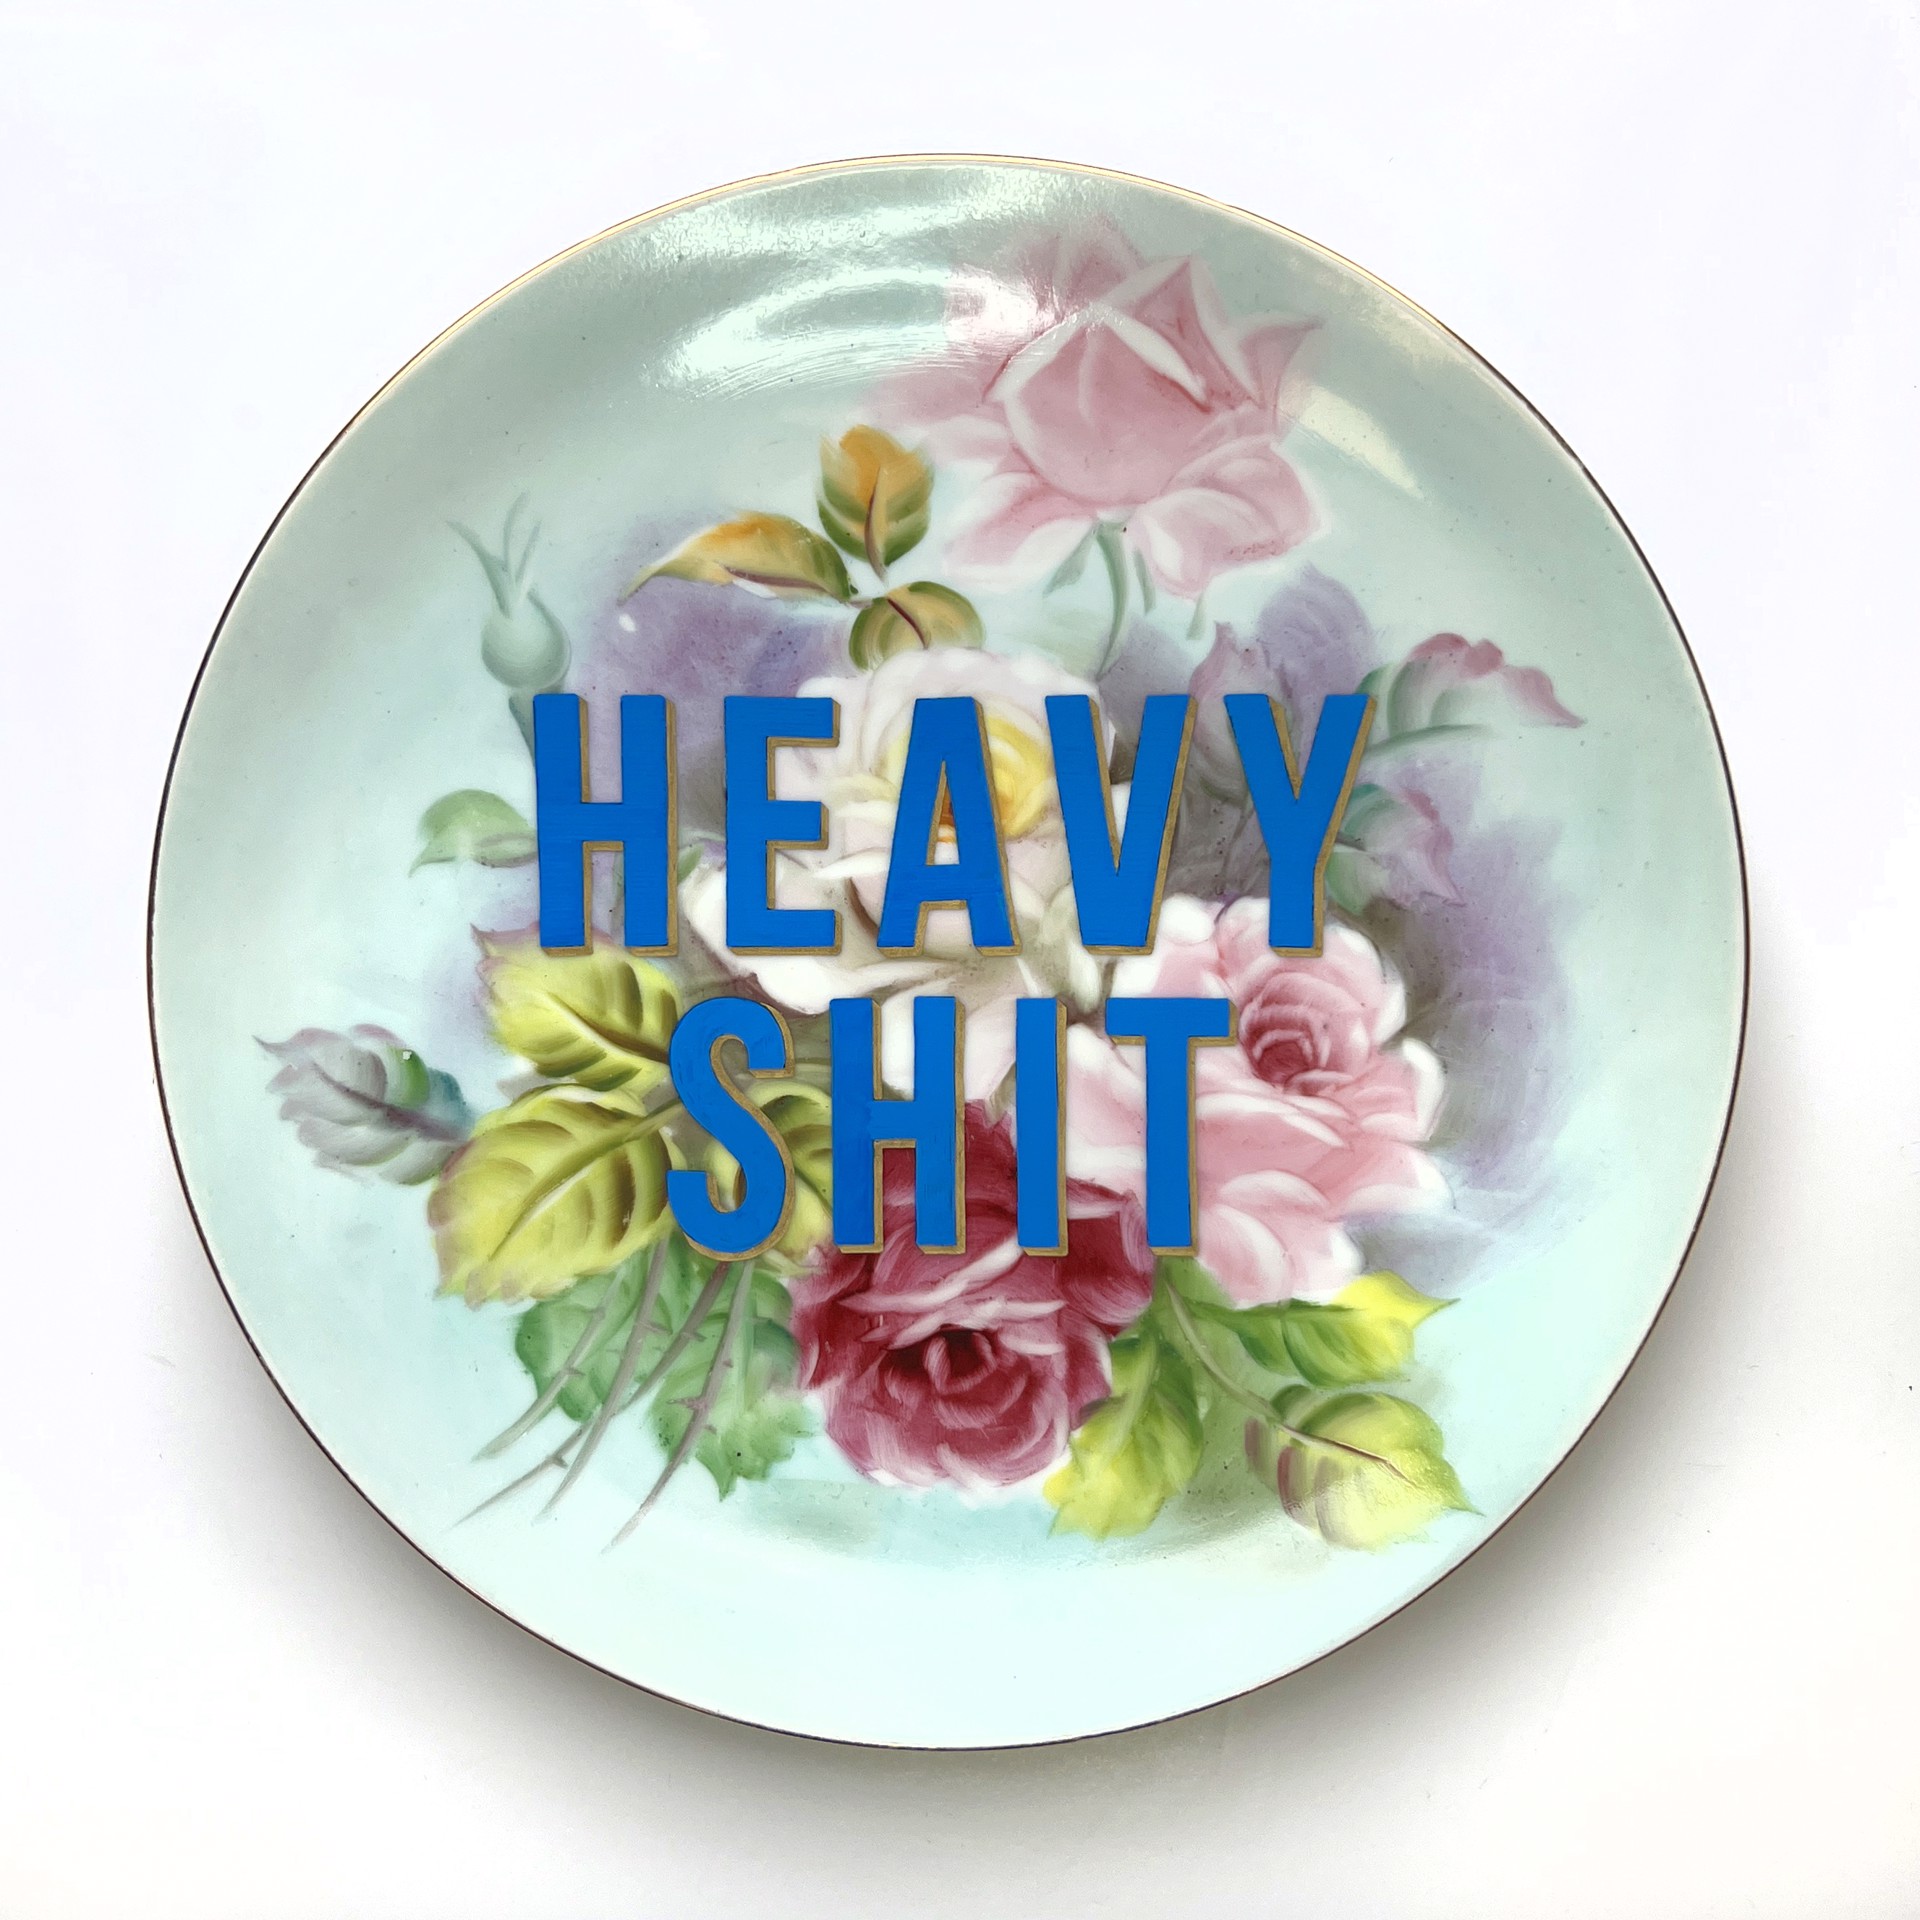 Heavy shit by Marie-Claude Marquis